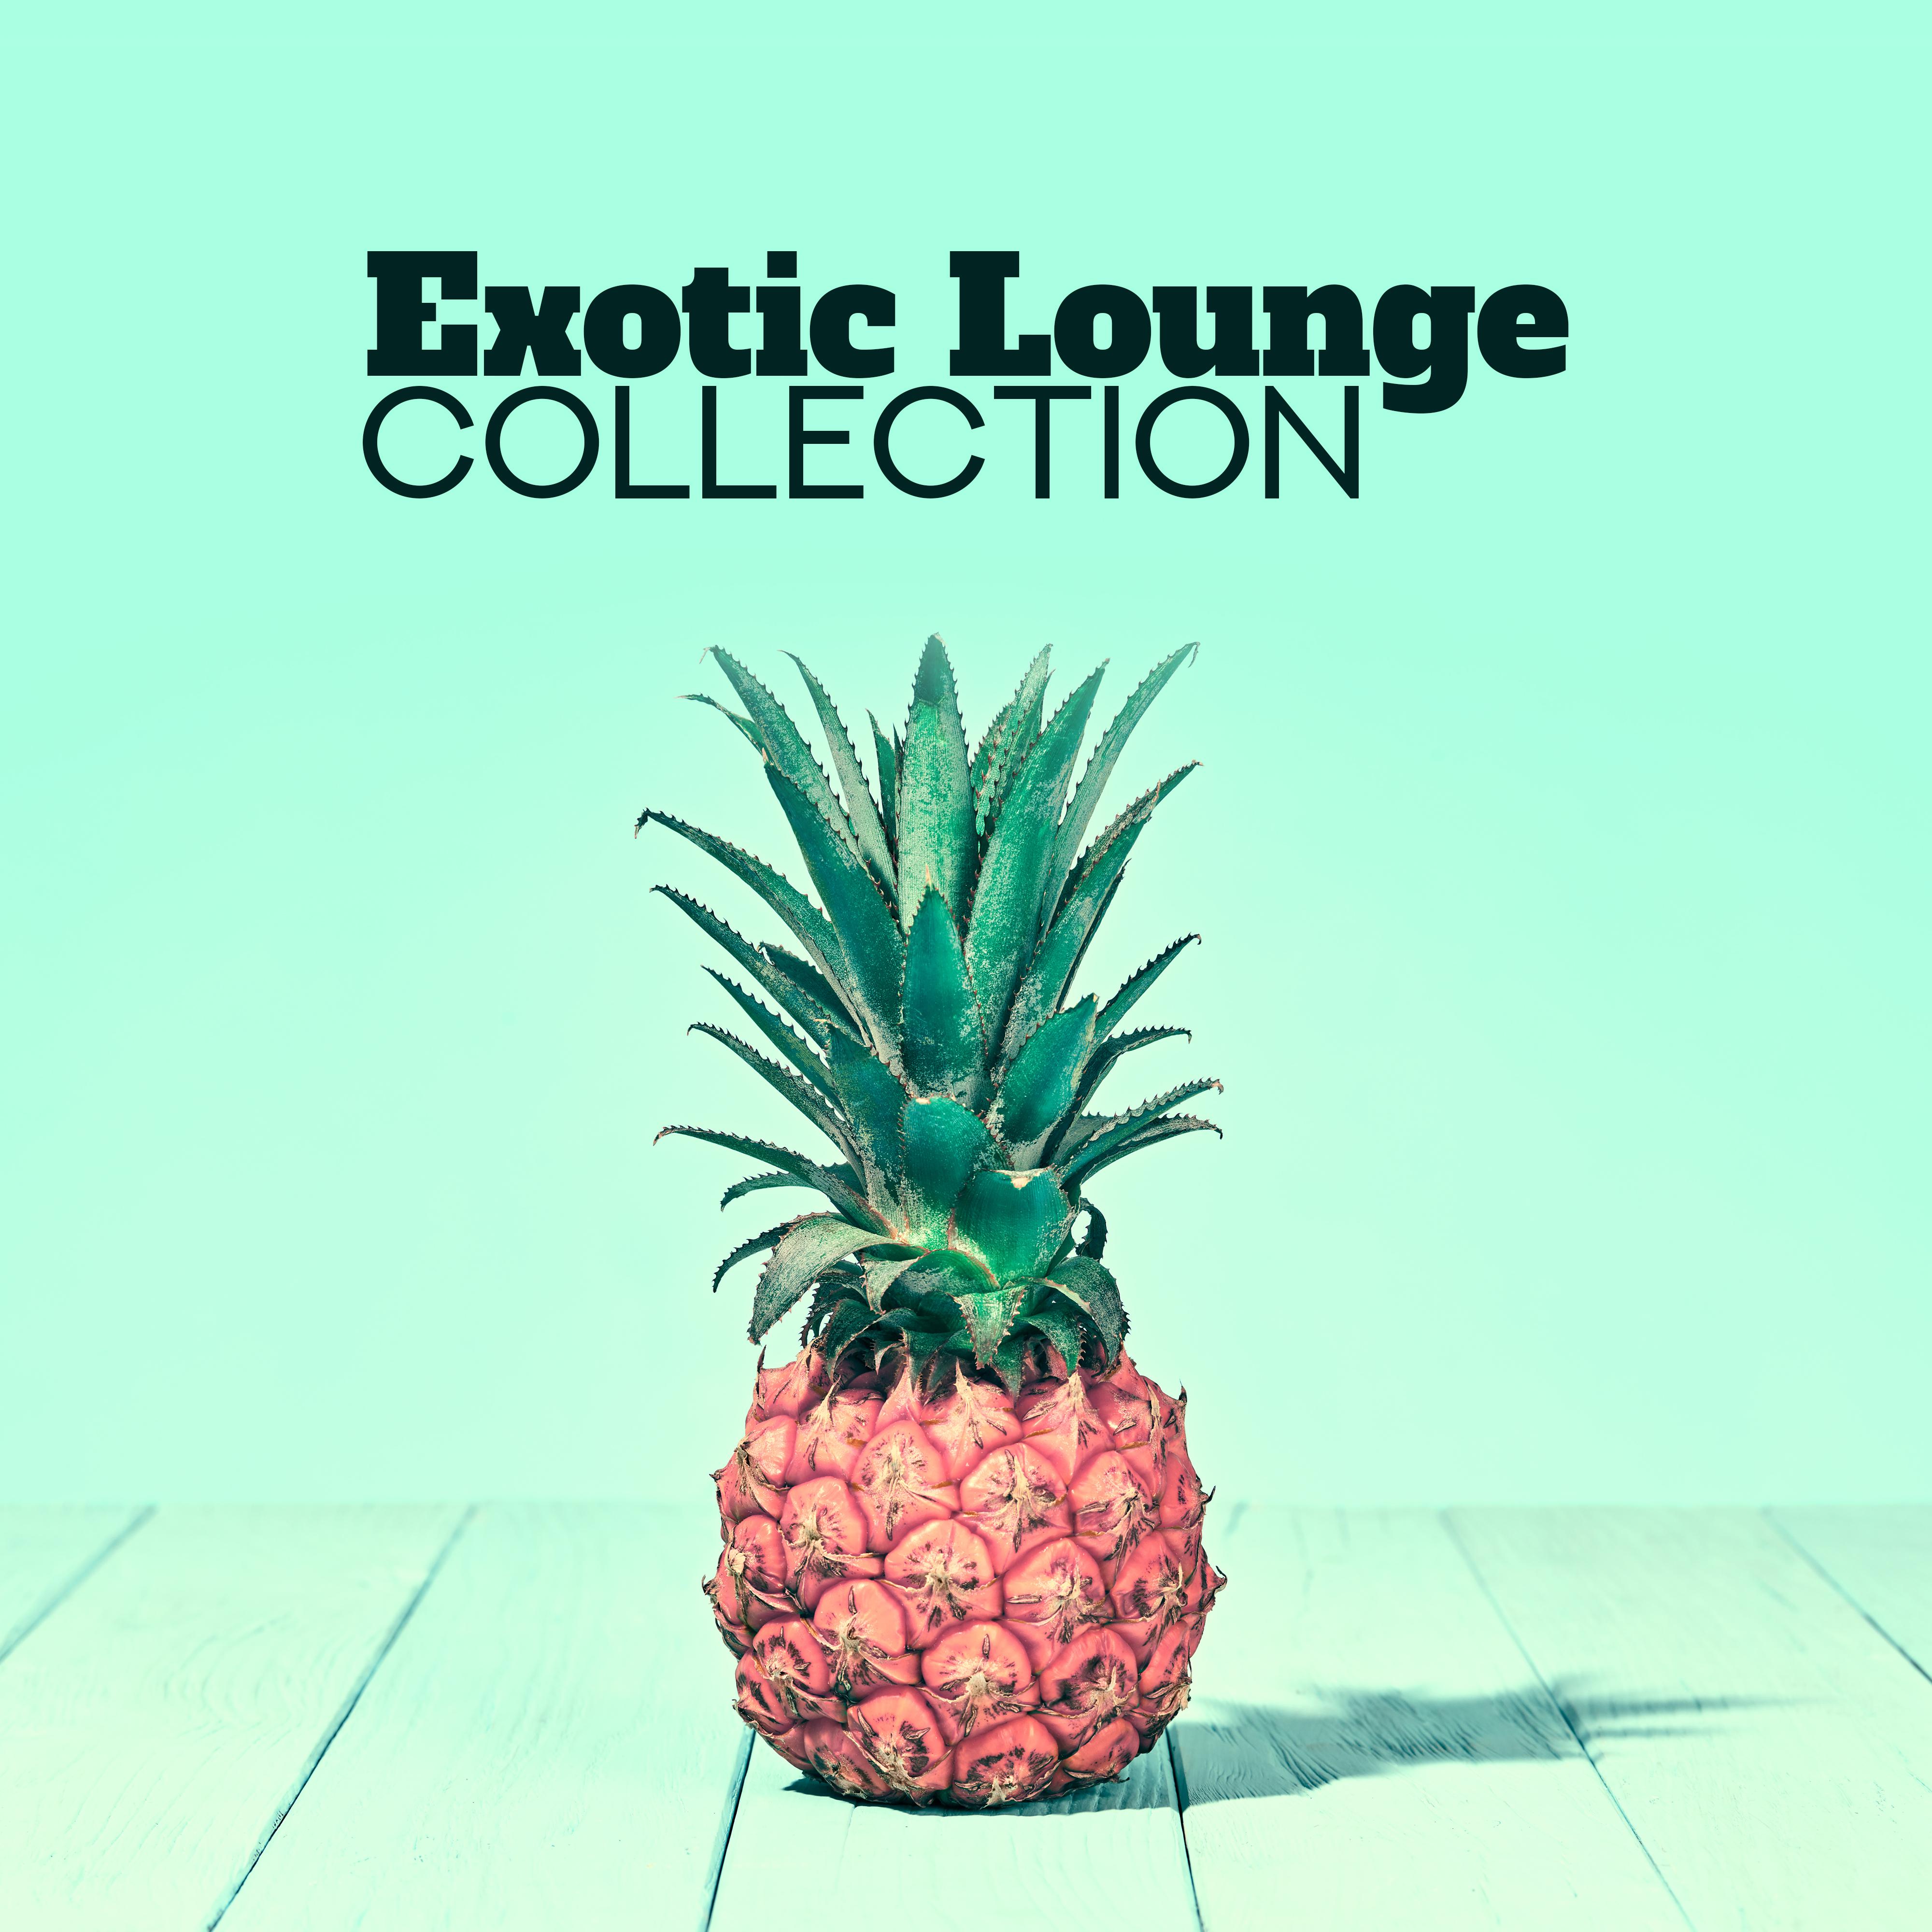 Exotic Lounge Collection  Beach Chillout, Ibiza Relaxation, Calm Down, Ibiza Lounge, Summer Music, Beach Party Vibrations, Tropical Music